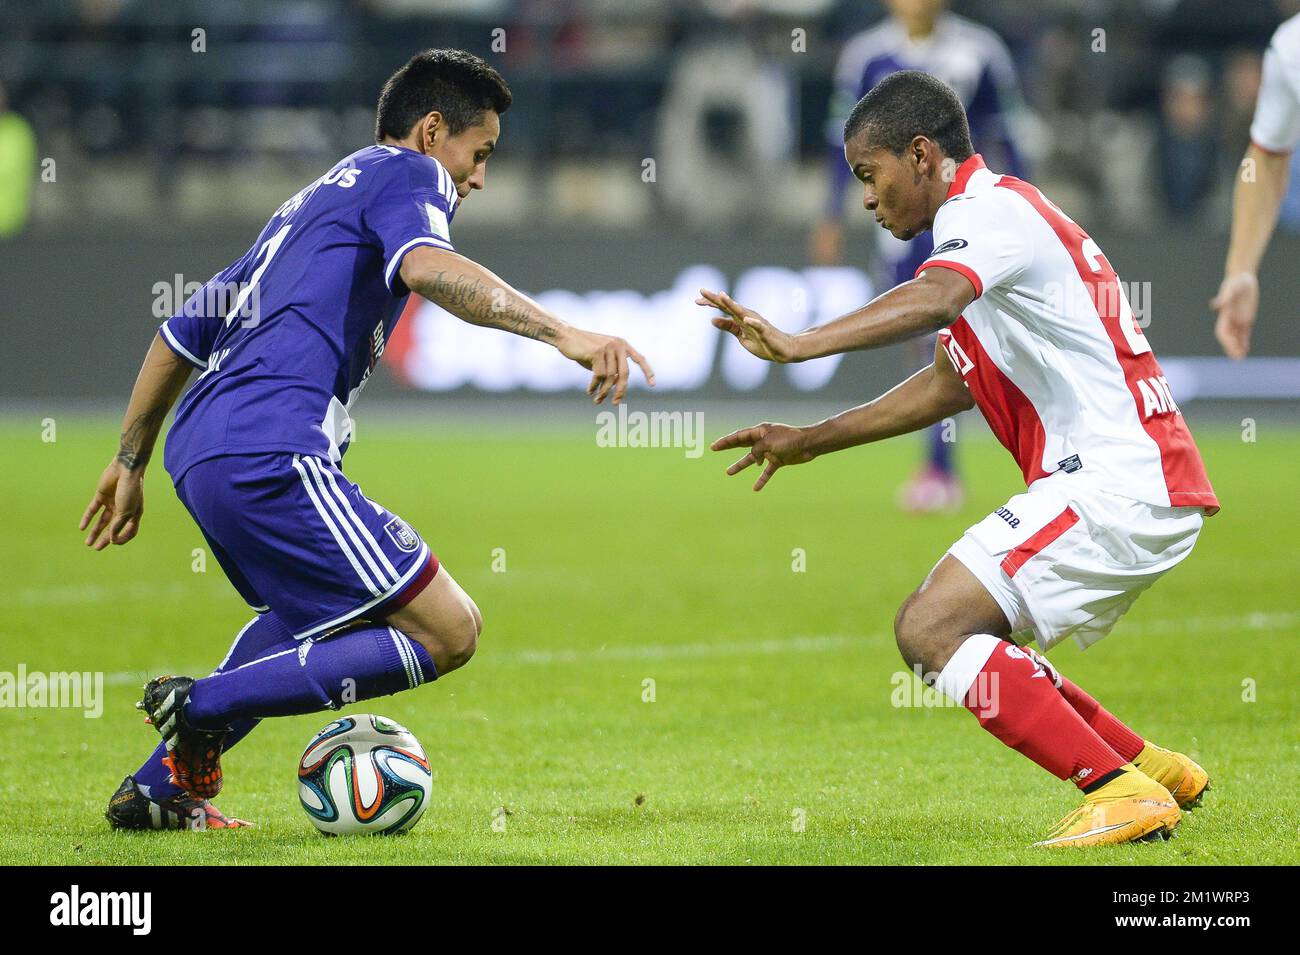 20141026 - BRUSSELS, BELGIUM: Anderlecht's Andy Najar and Standard's Darwin Andrade fight for the ball during the Jupiler Pro League match between RSC Anderlecht and Standard de Liege, in Brussels, Sunday 26 October 2014, on day 12 of the Belgian soccer championship. BELGA PHOTO LAURIE DIEFFEMBACQ Stock Photo